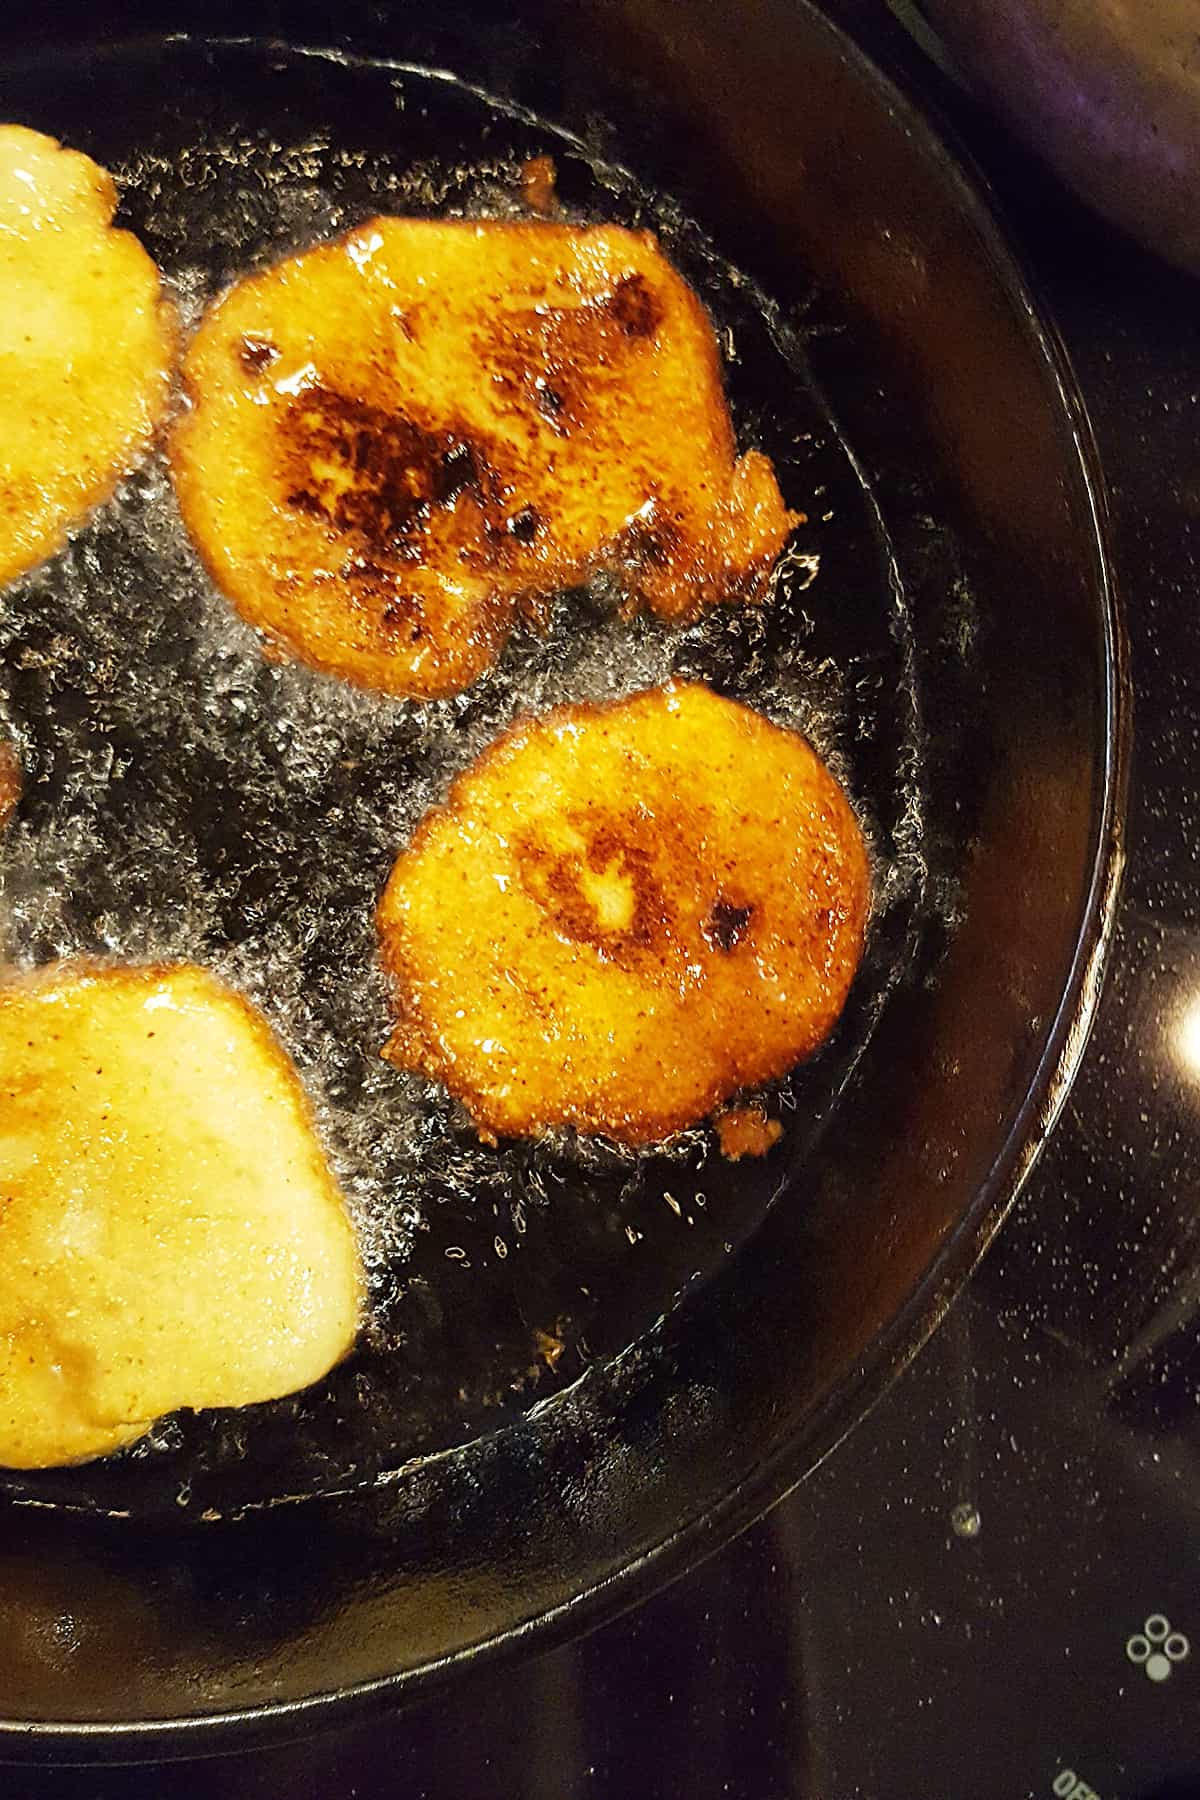 Cornmeal patties in a cast iron skillet after browning on the second ide.